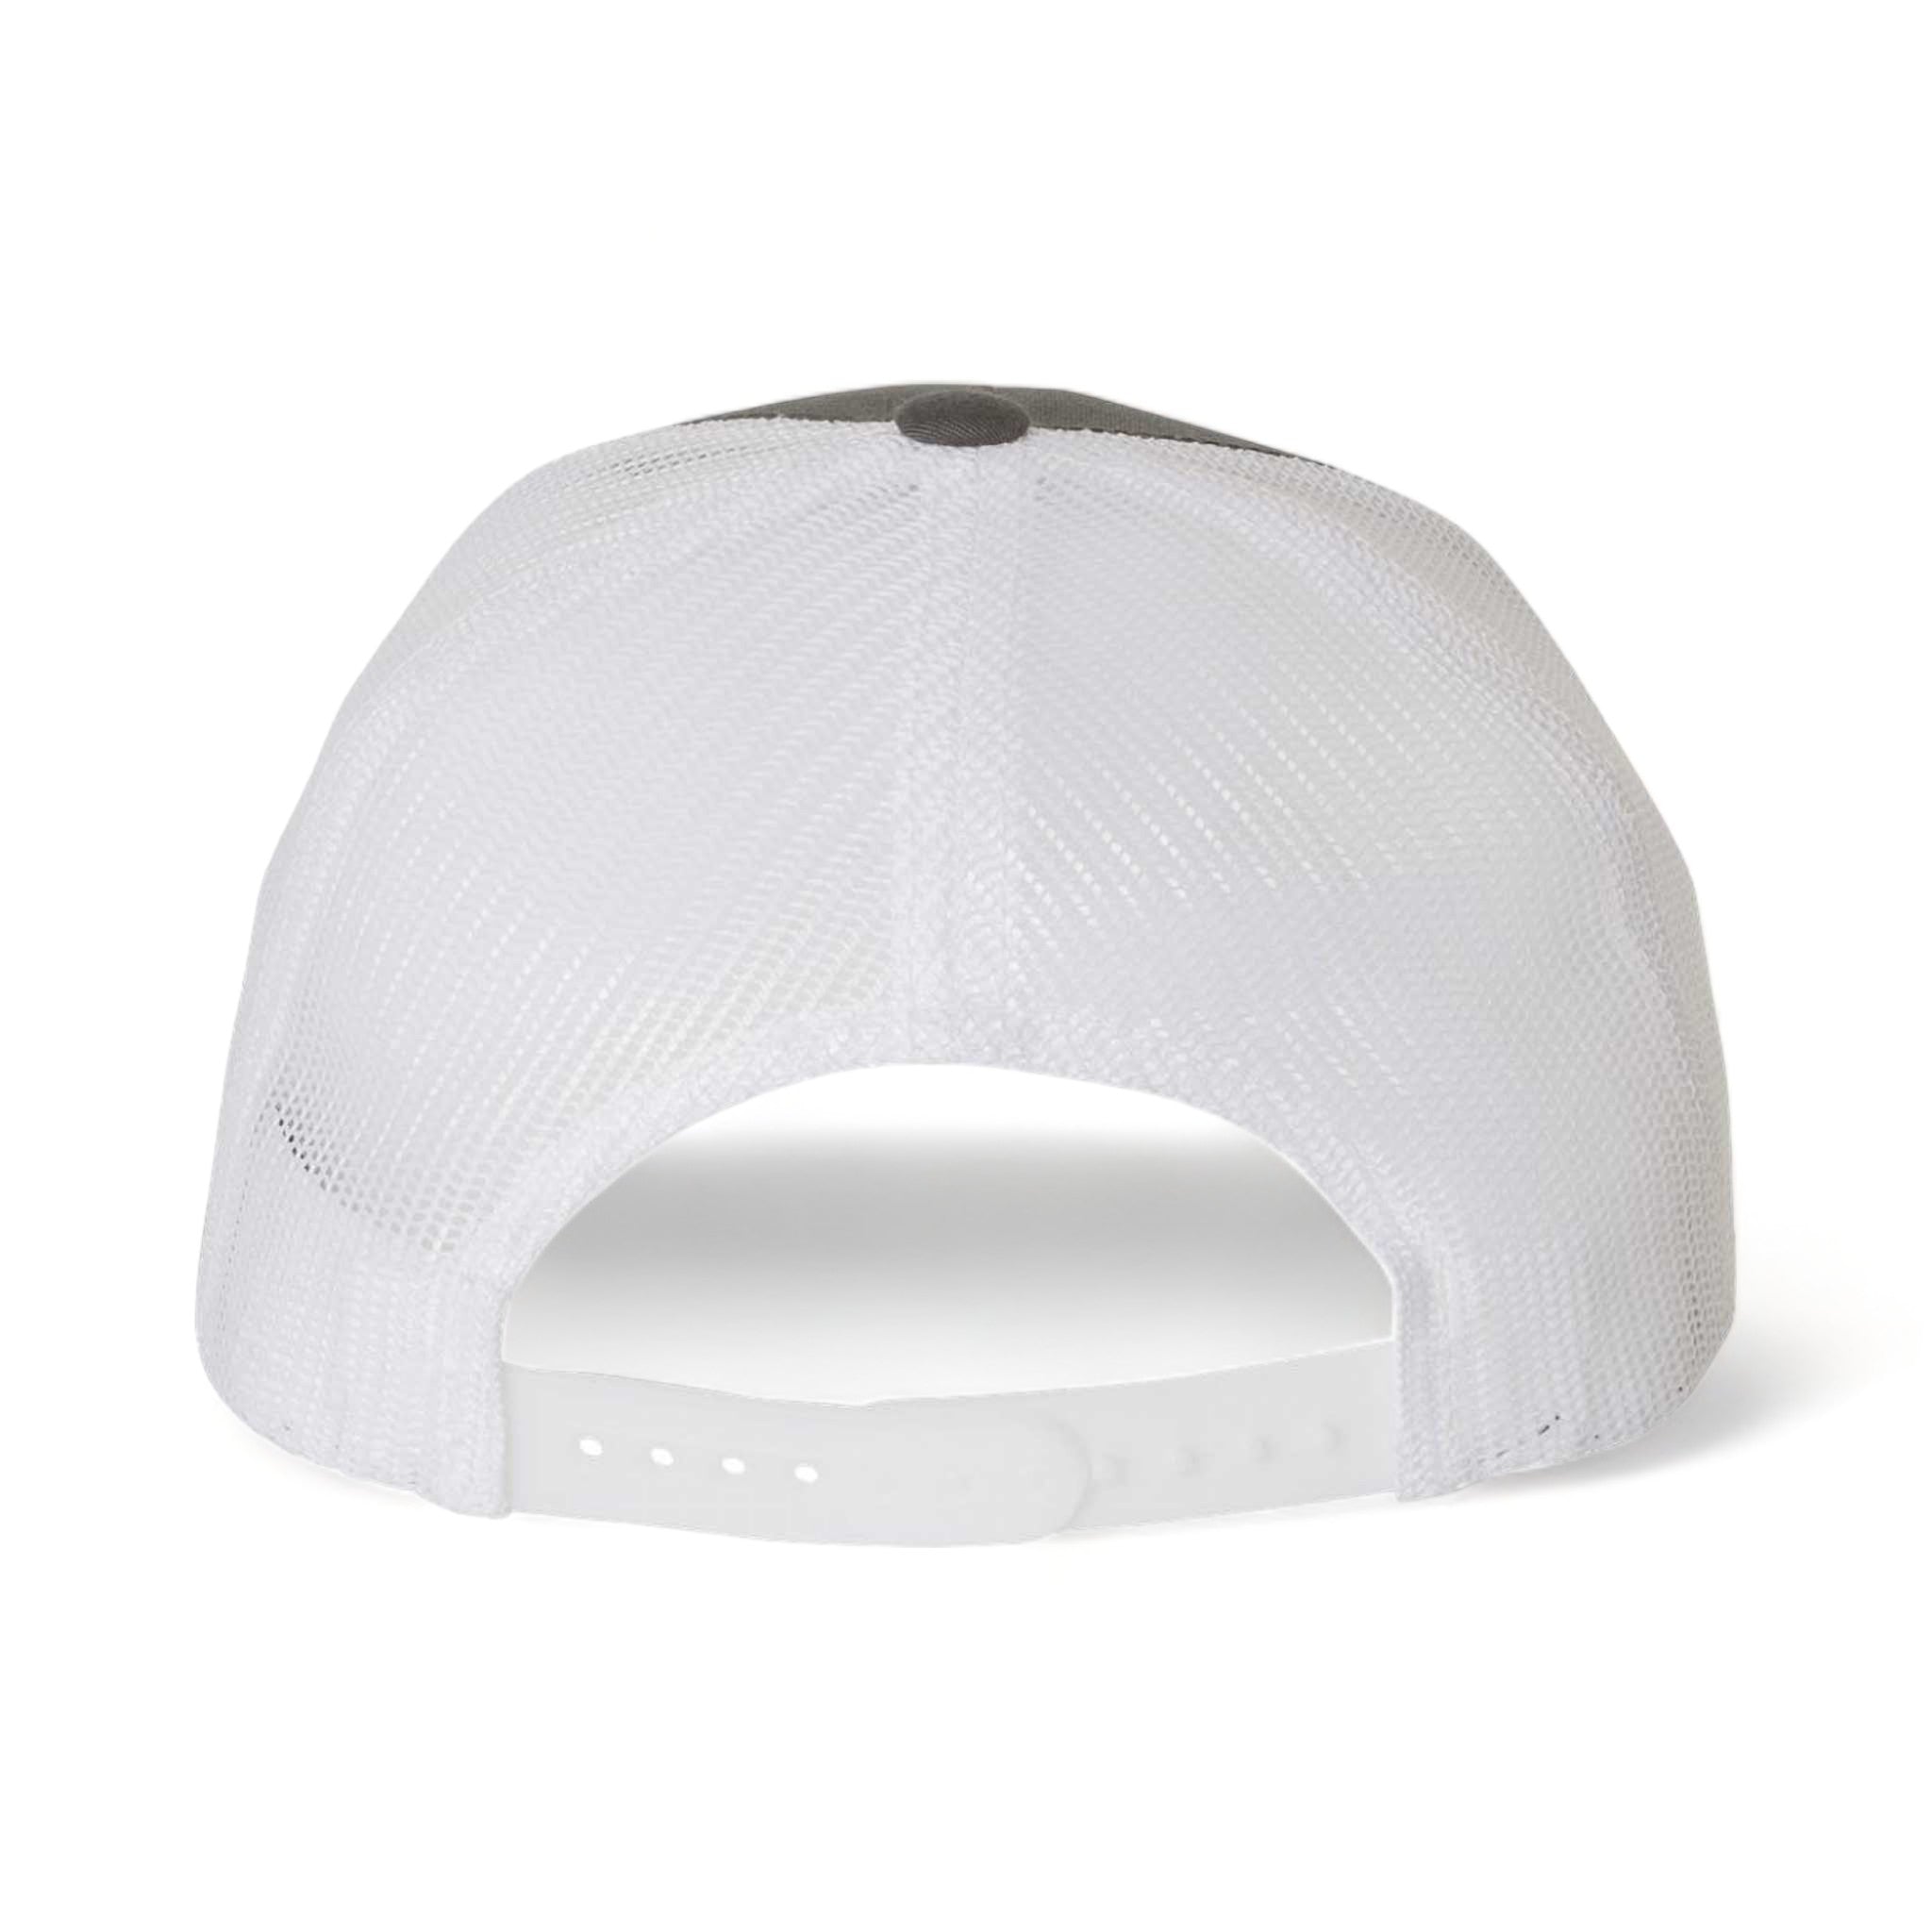 Back view of YP Classics 6506 custom hat in charcoal and white